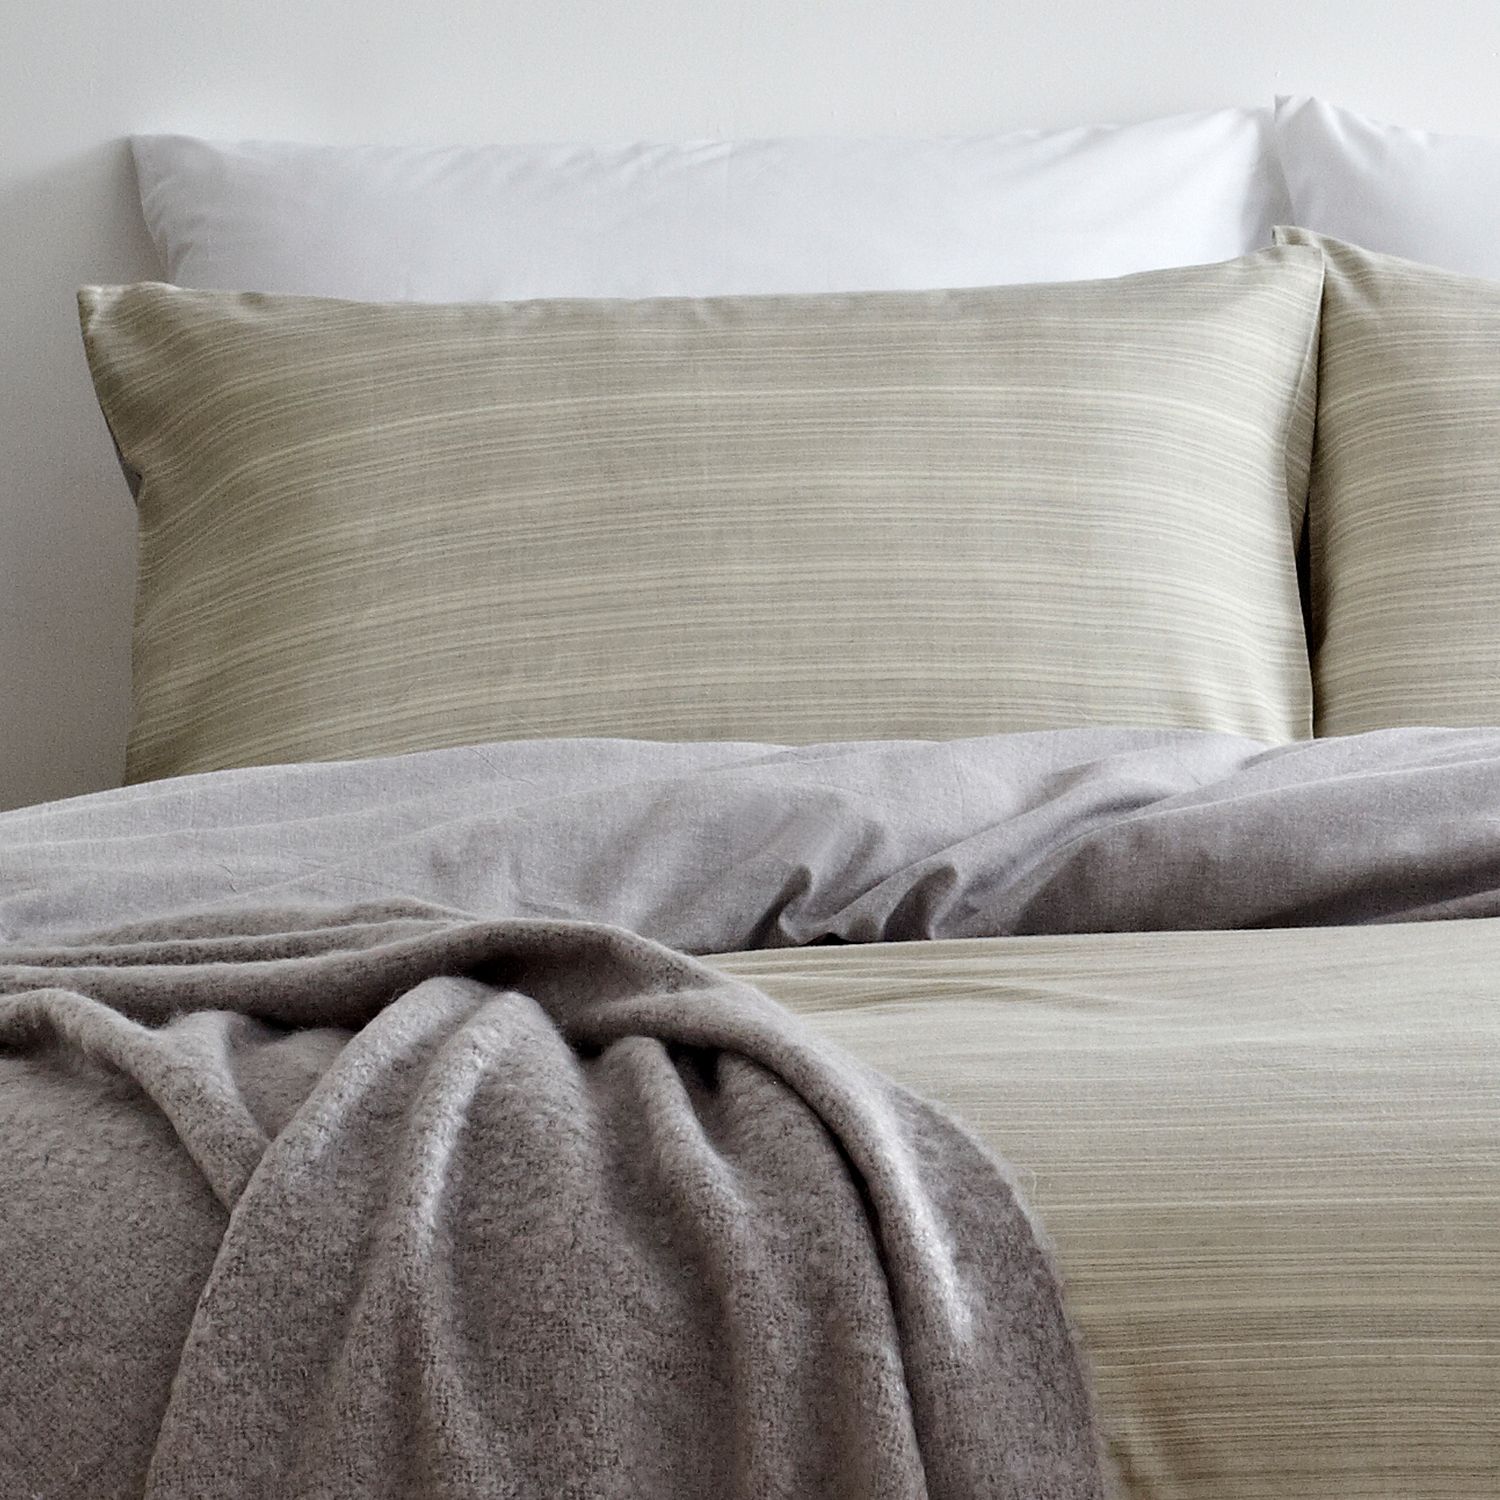 Create a signature look with this perfectly relaxed duvet cover and pillow case set. With soft earthy tones, this design creates a warm and restful mood. The reversible design allows the subtle ombre effect to give a natural textured apperance whilst the chambray grey reverse is ultra versitable for any bedroom.